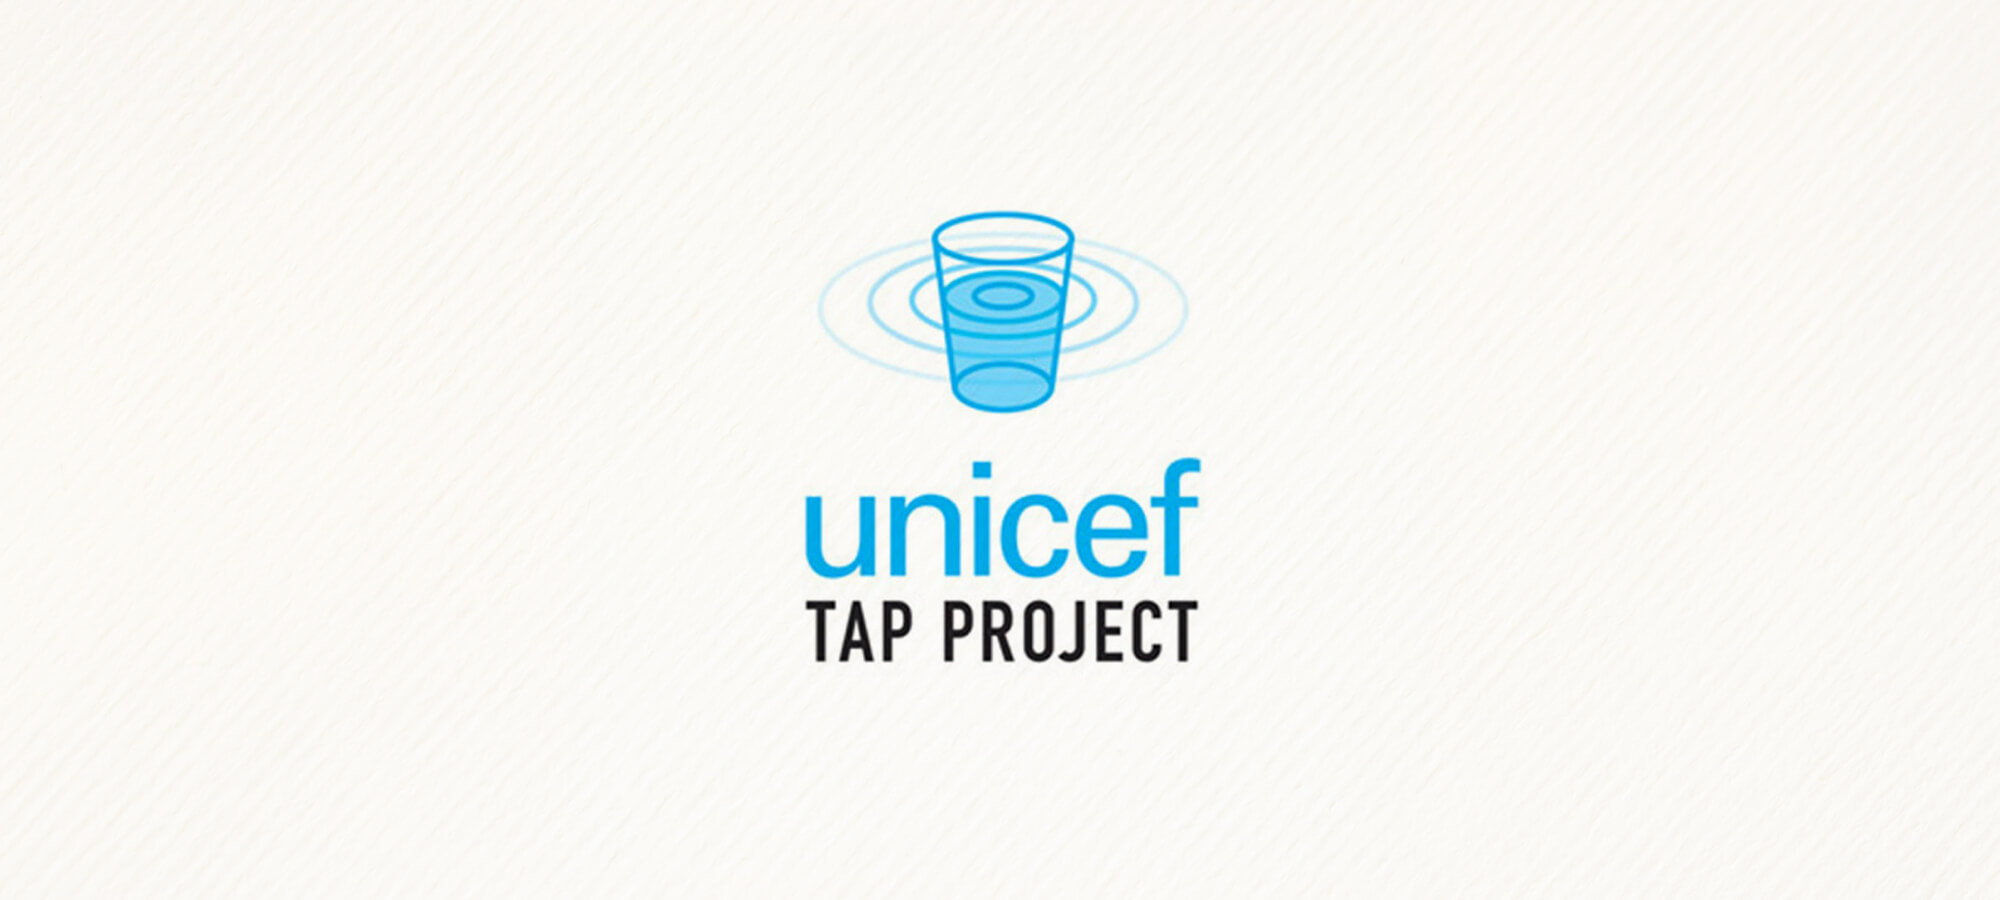 20-astonishing-facts-about-unicef-tap-project